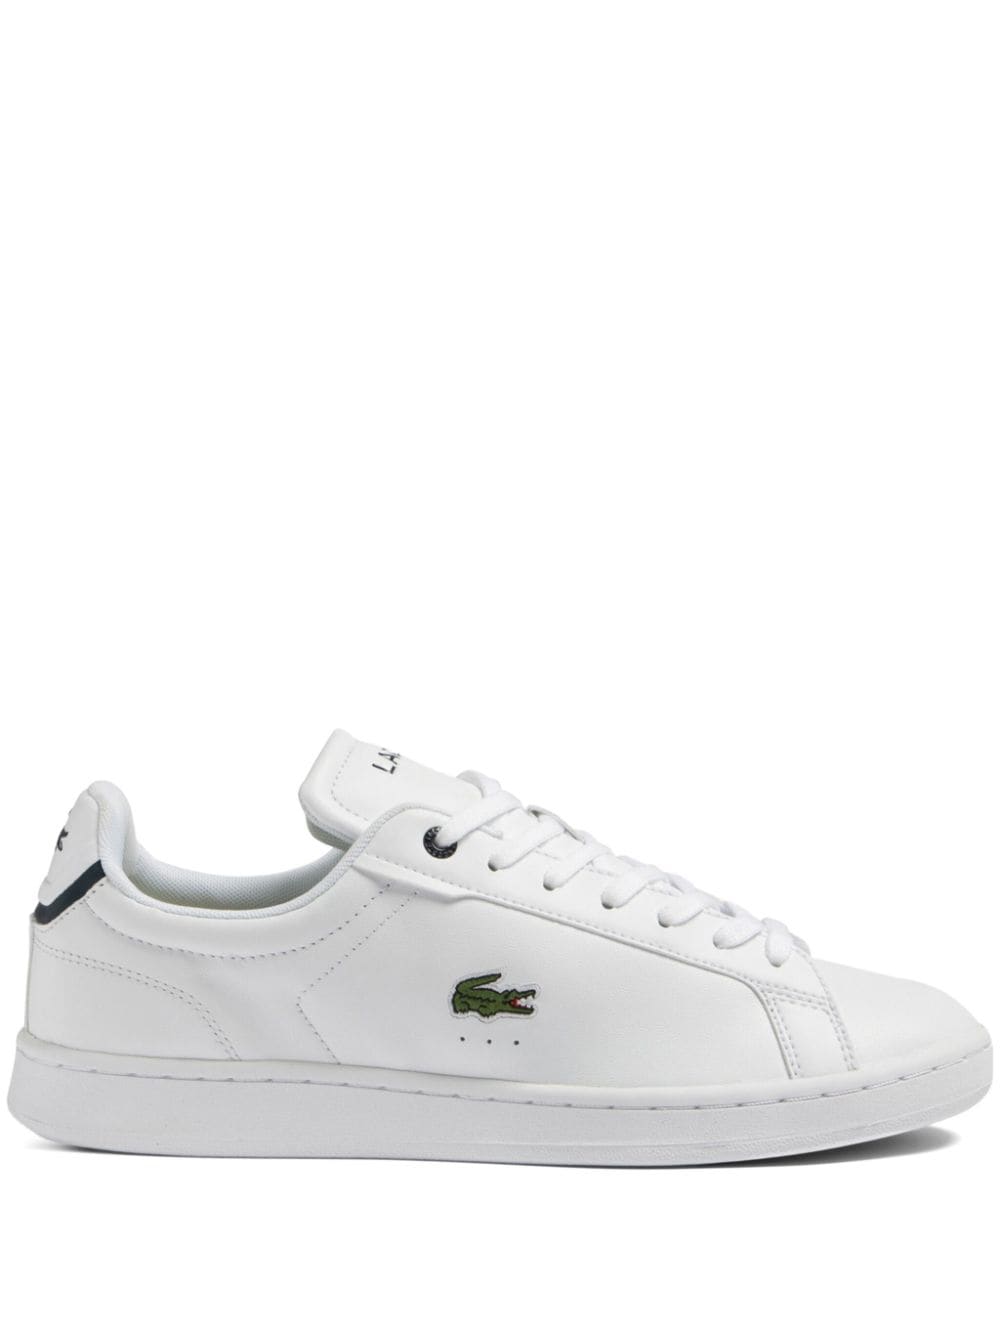 LACOSTE CARNABY PRO BL LEATHER trainers